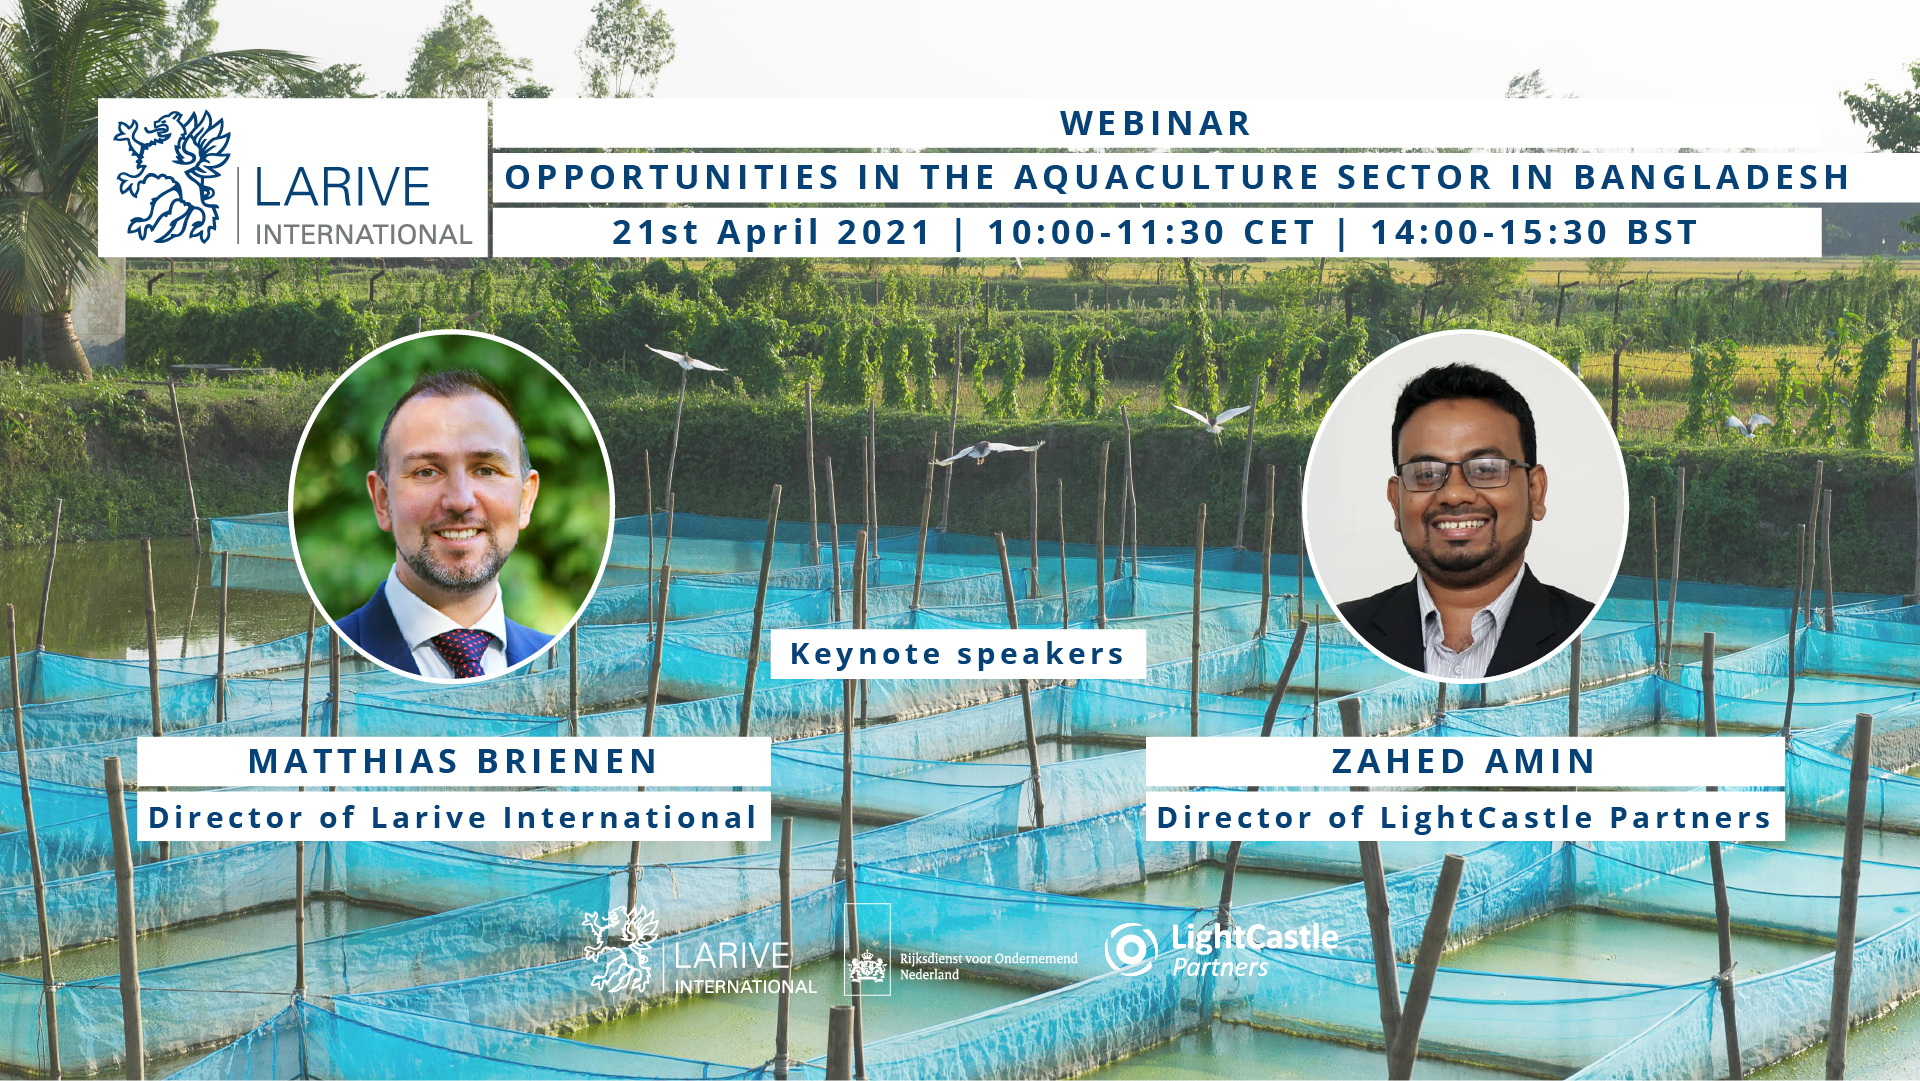 Webinar on the Opportunities in The Aquaculture Sector in Bangladesh